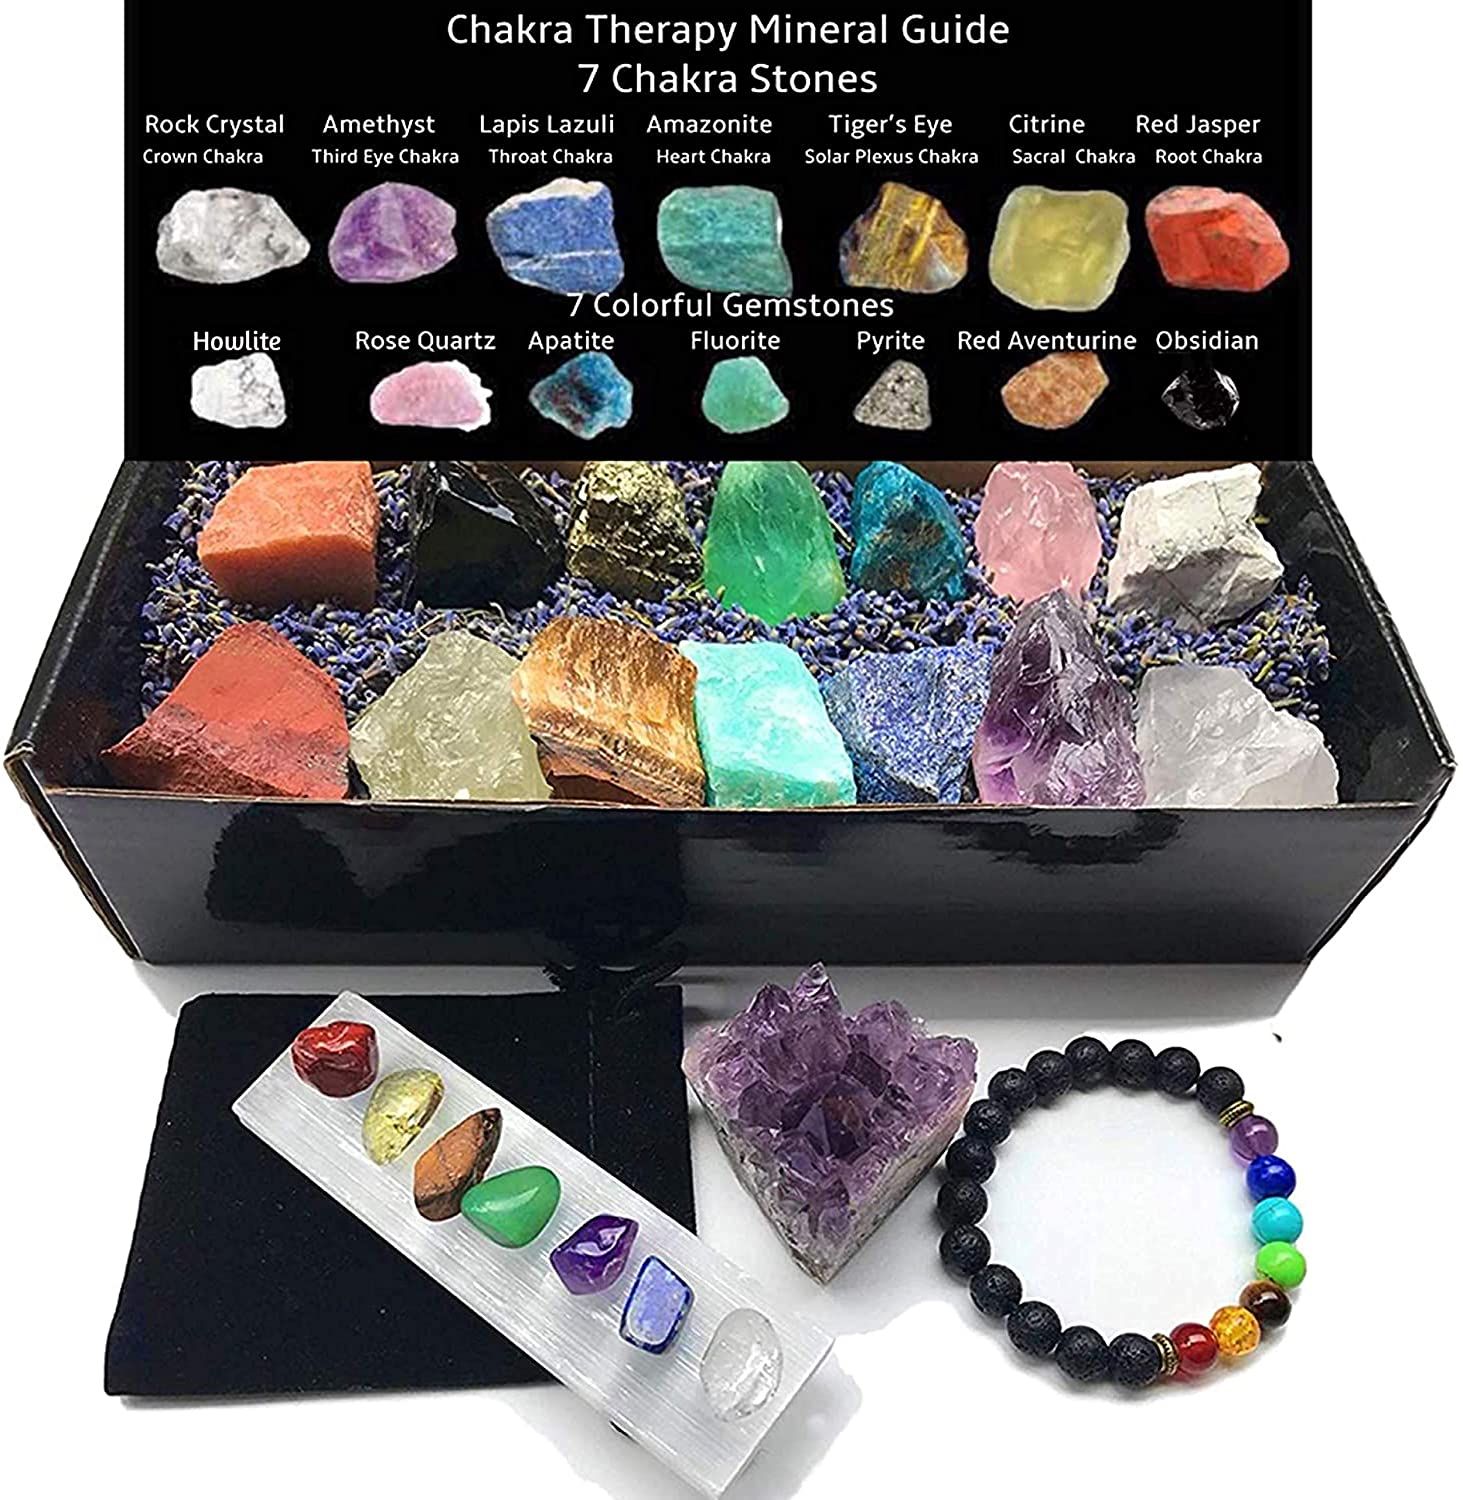 Crystal healing can actually work and even give good benefits, says Crystal Energy Initiative (CrEI) study with healing crystals